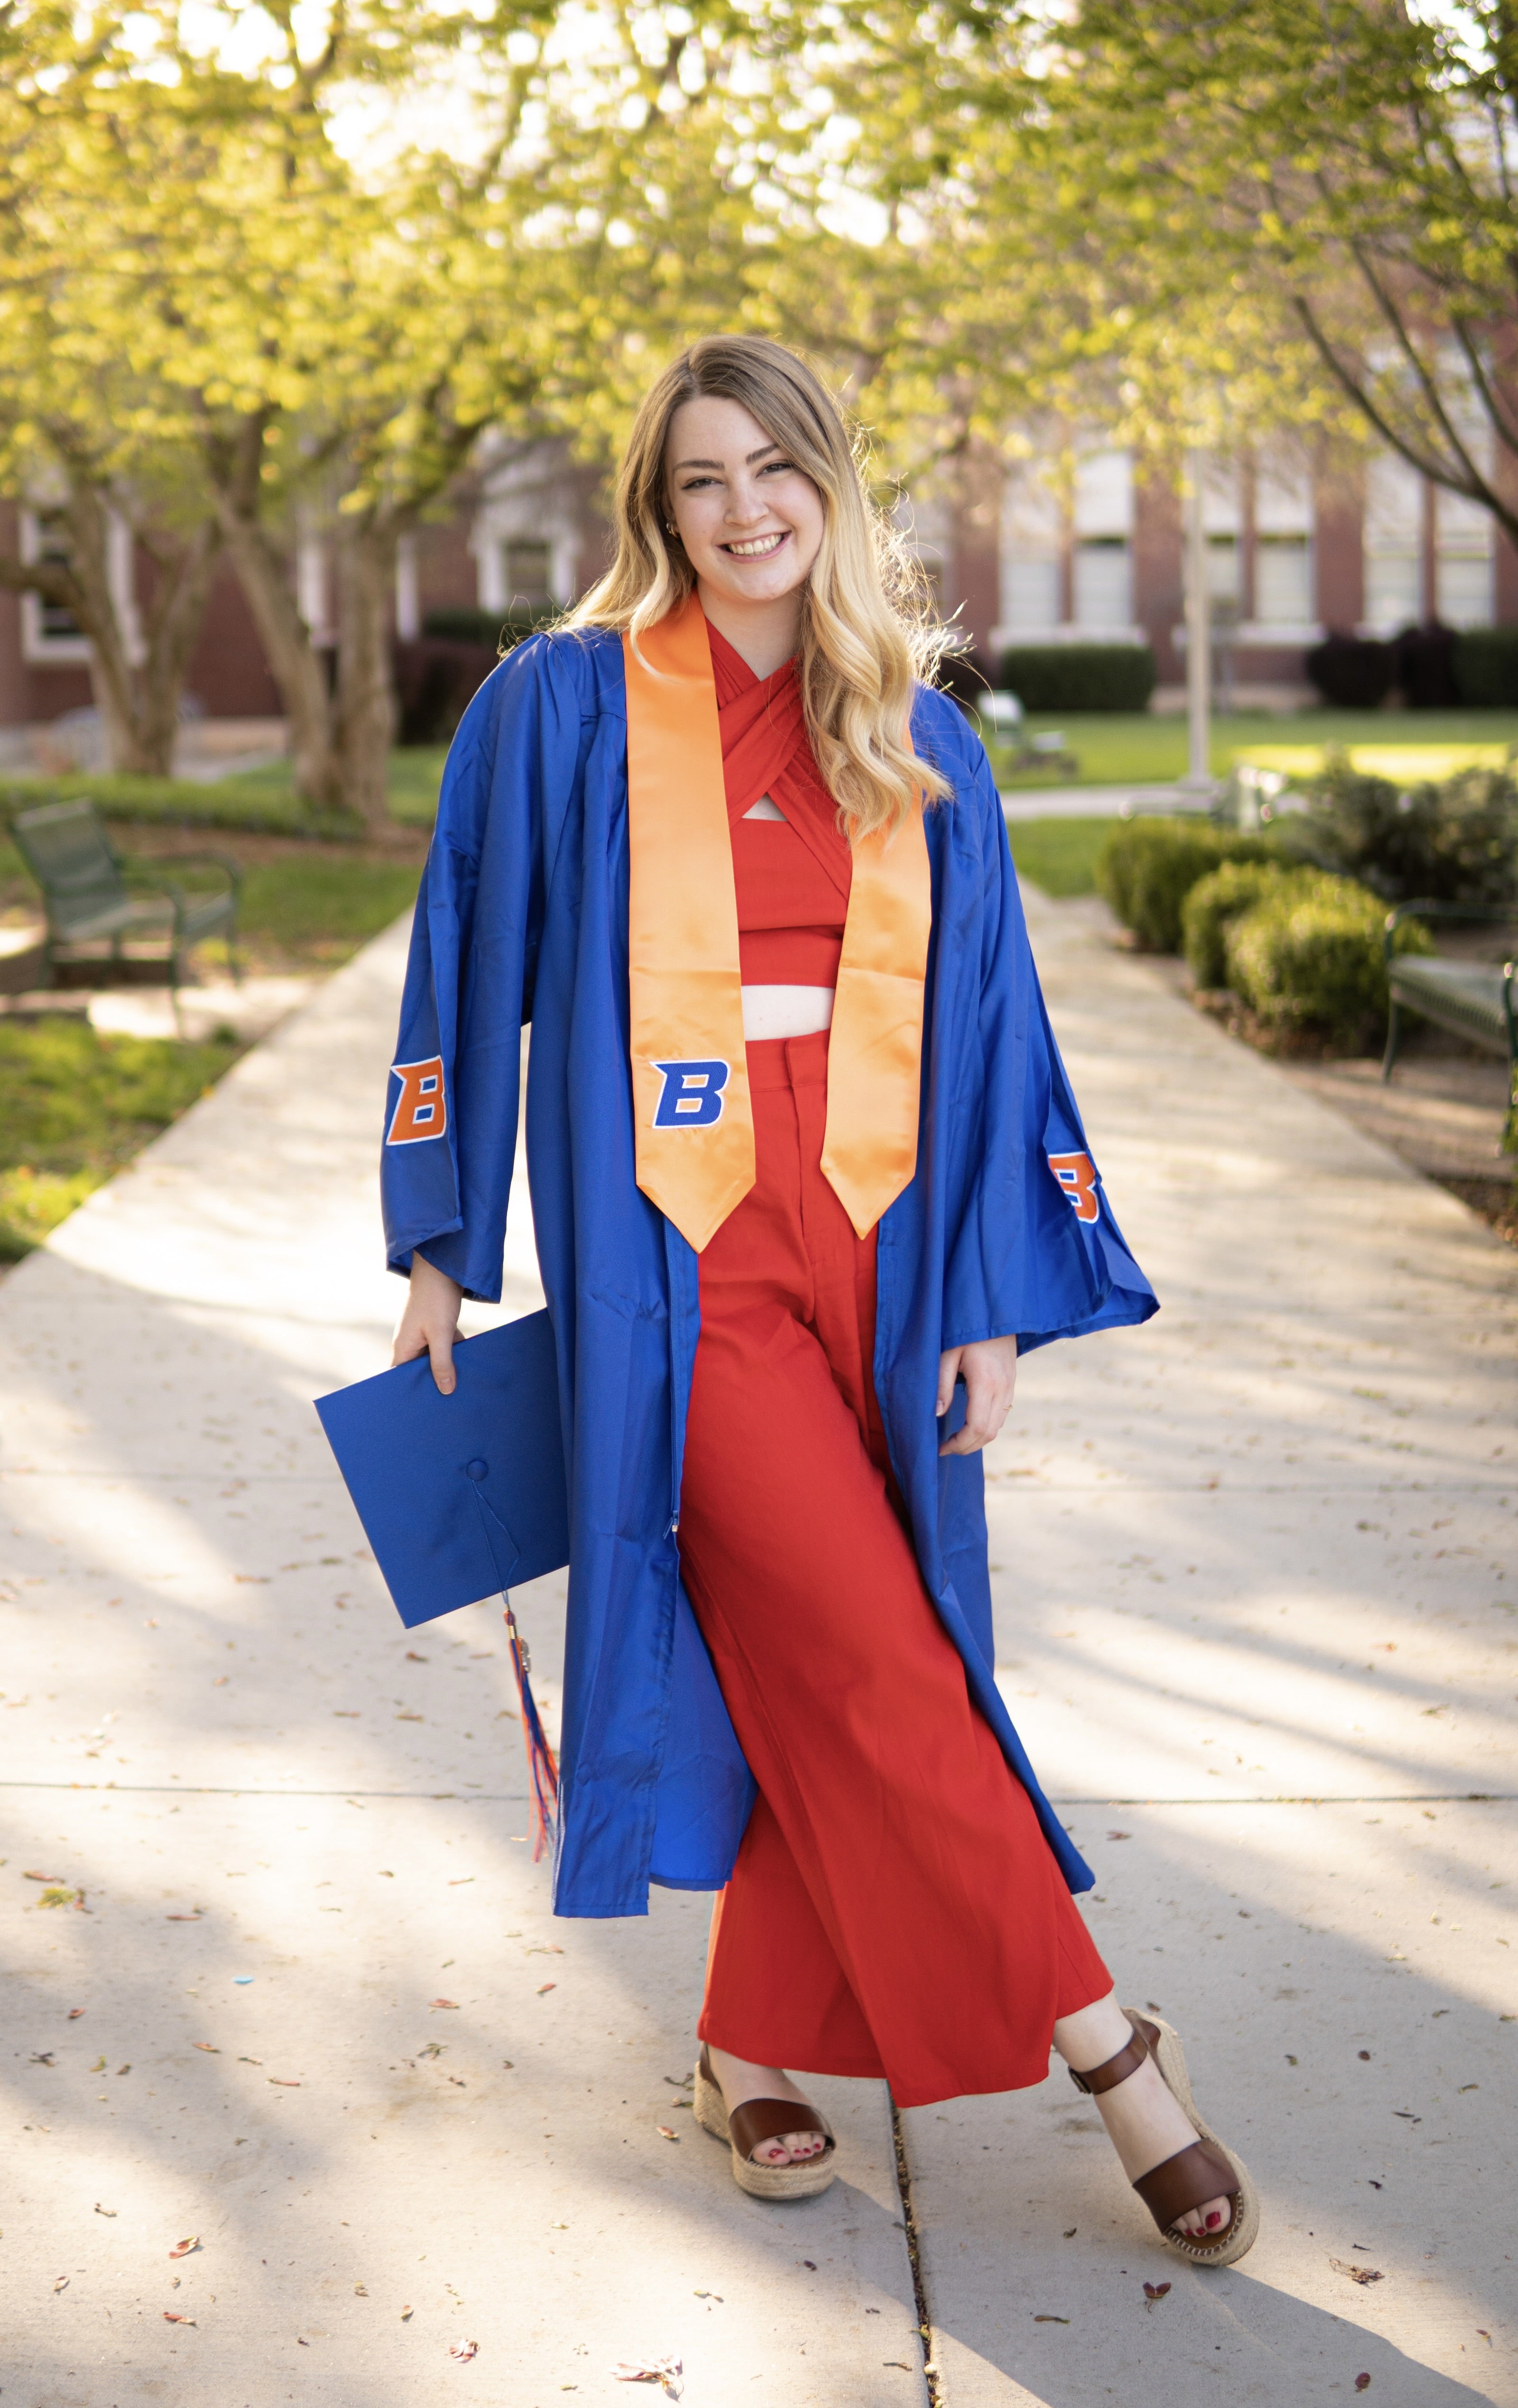 Grace Hall poses in her cap and gown